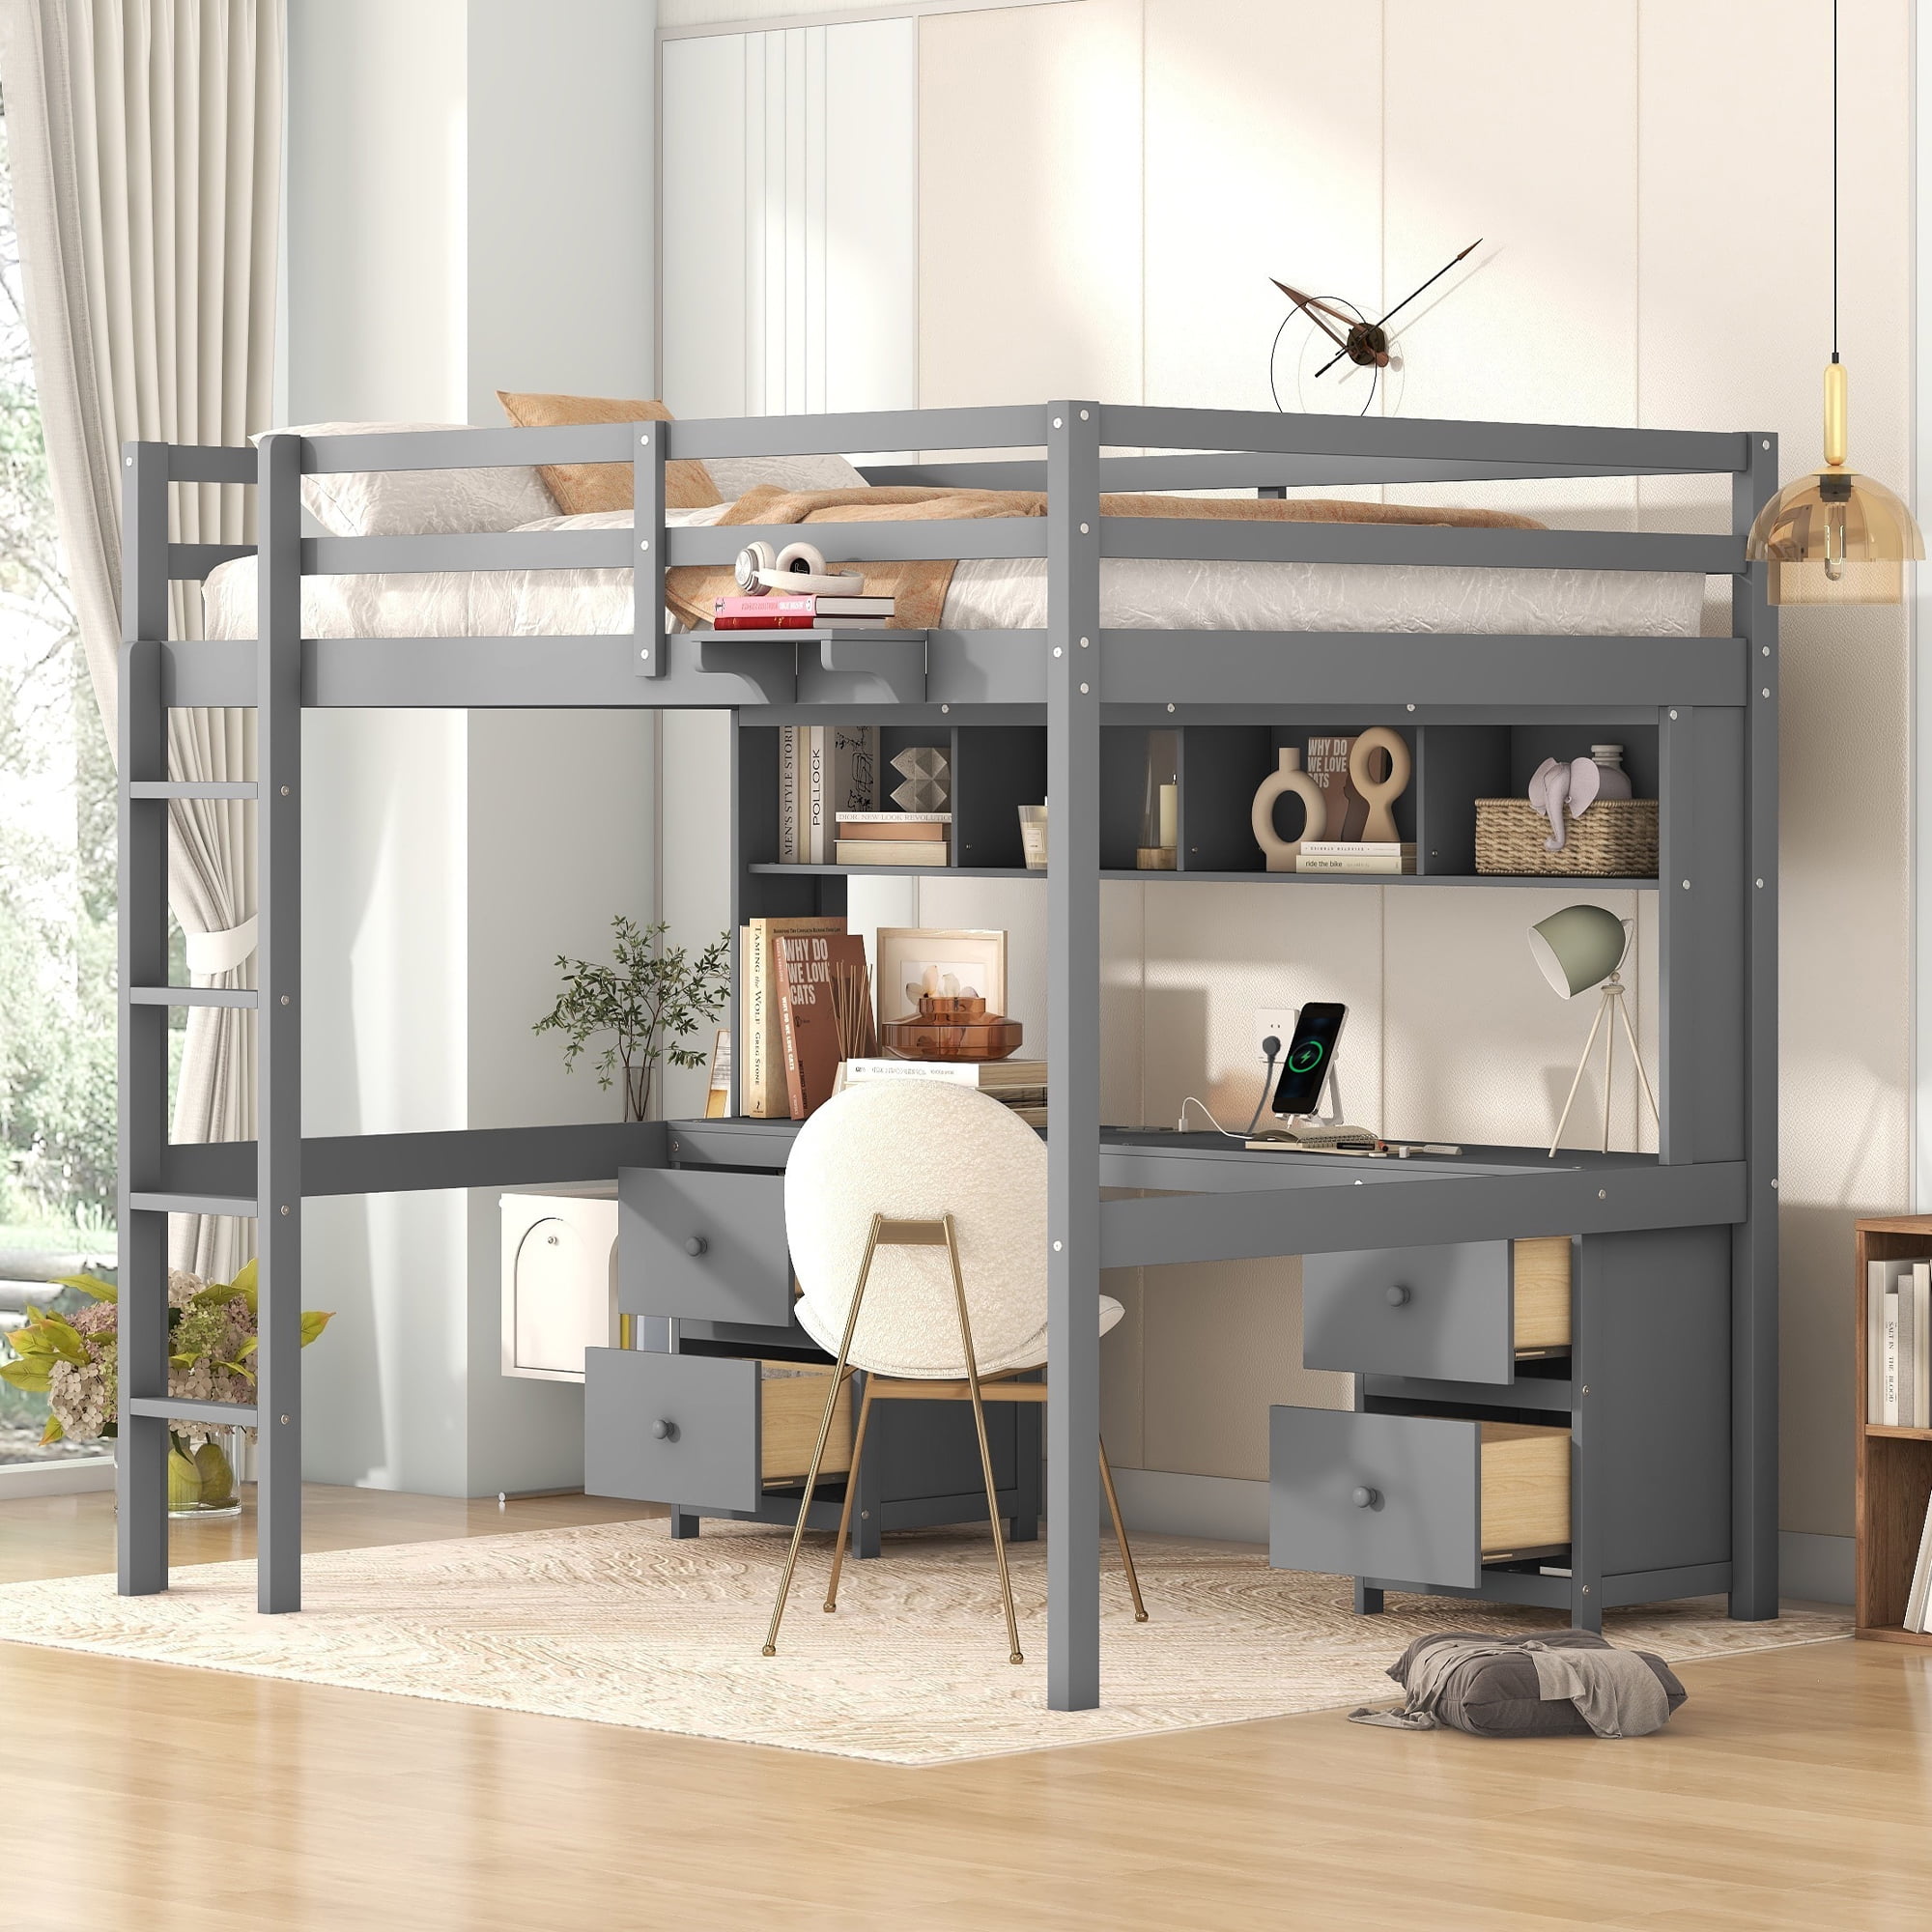 CoSoTower Full Size Loft Bed with Desk, Cabinets, Drawers and Bedside ...